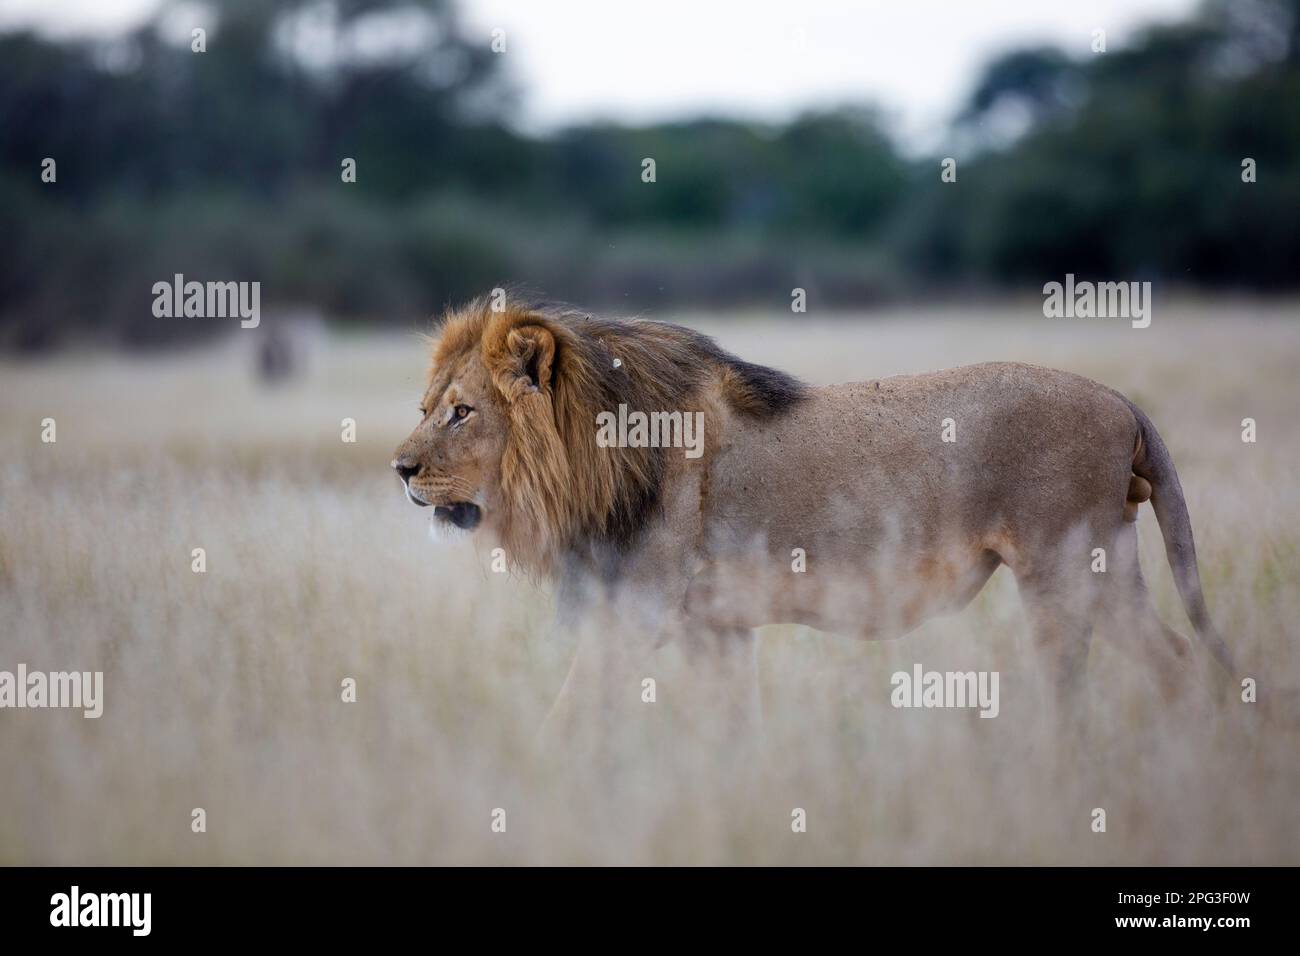 Full-grown adult male lion with a dark mane walking intently in tall dry grass Stock Photo